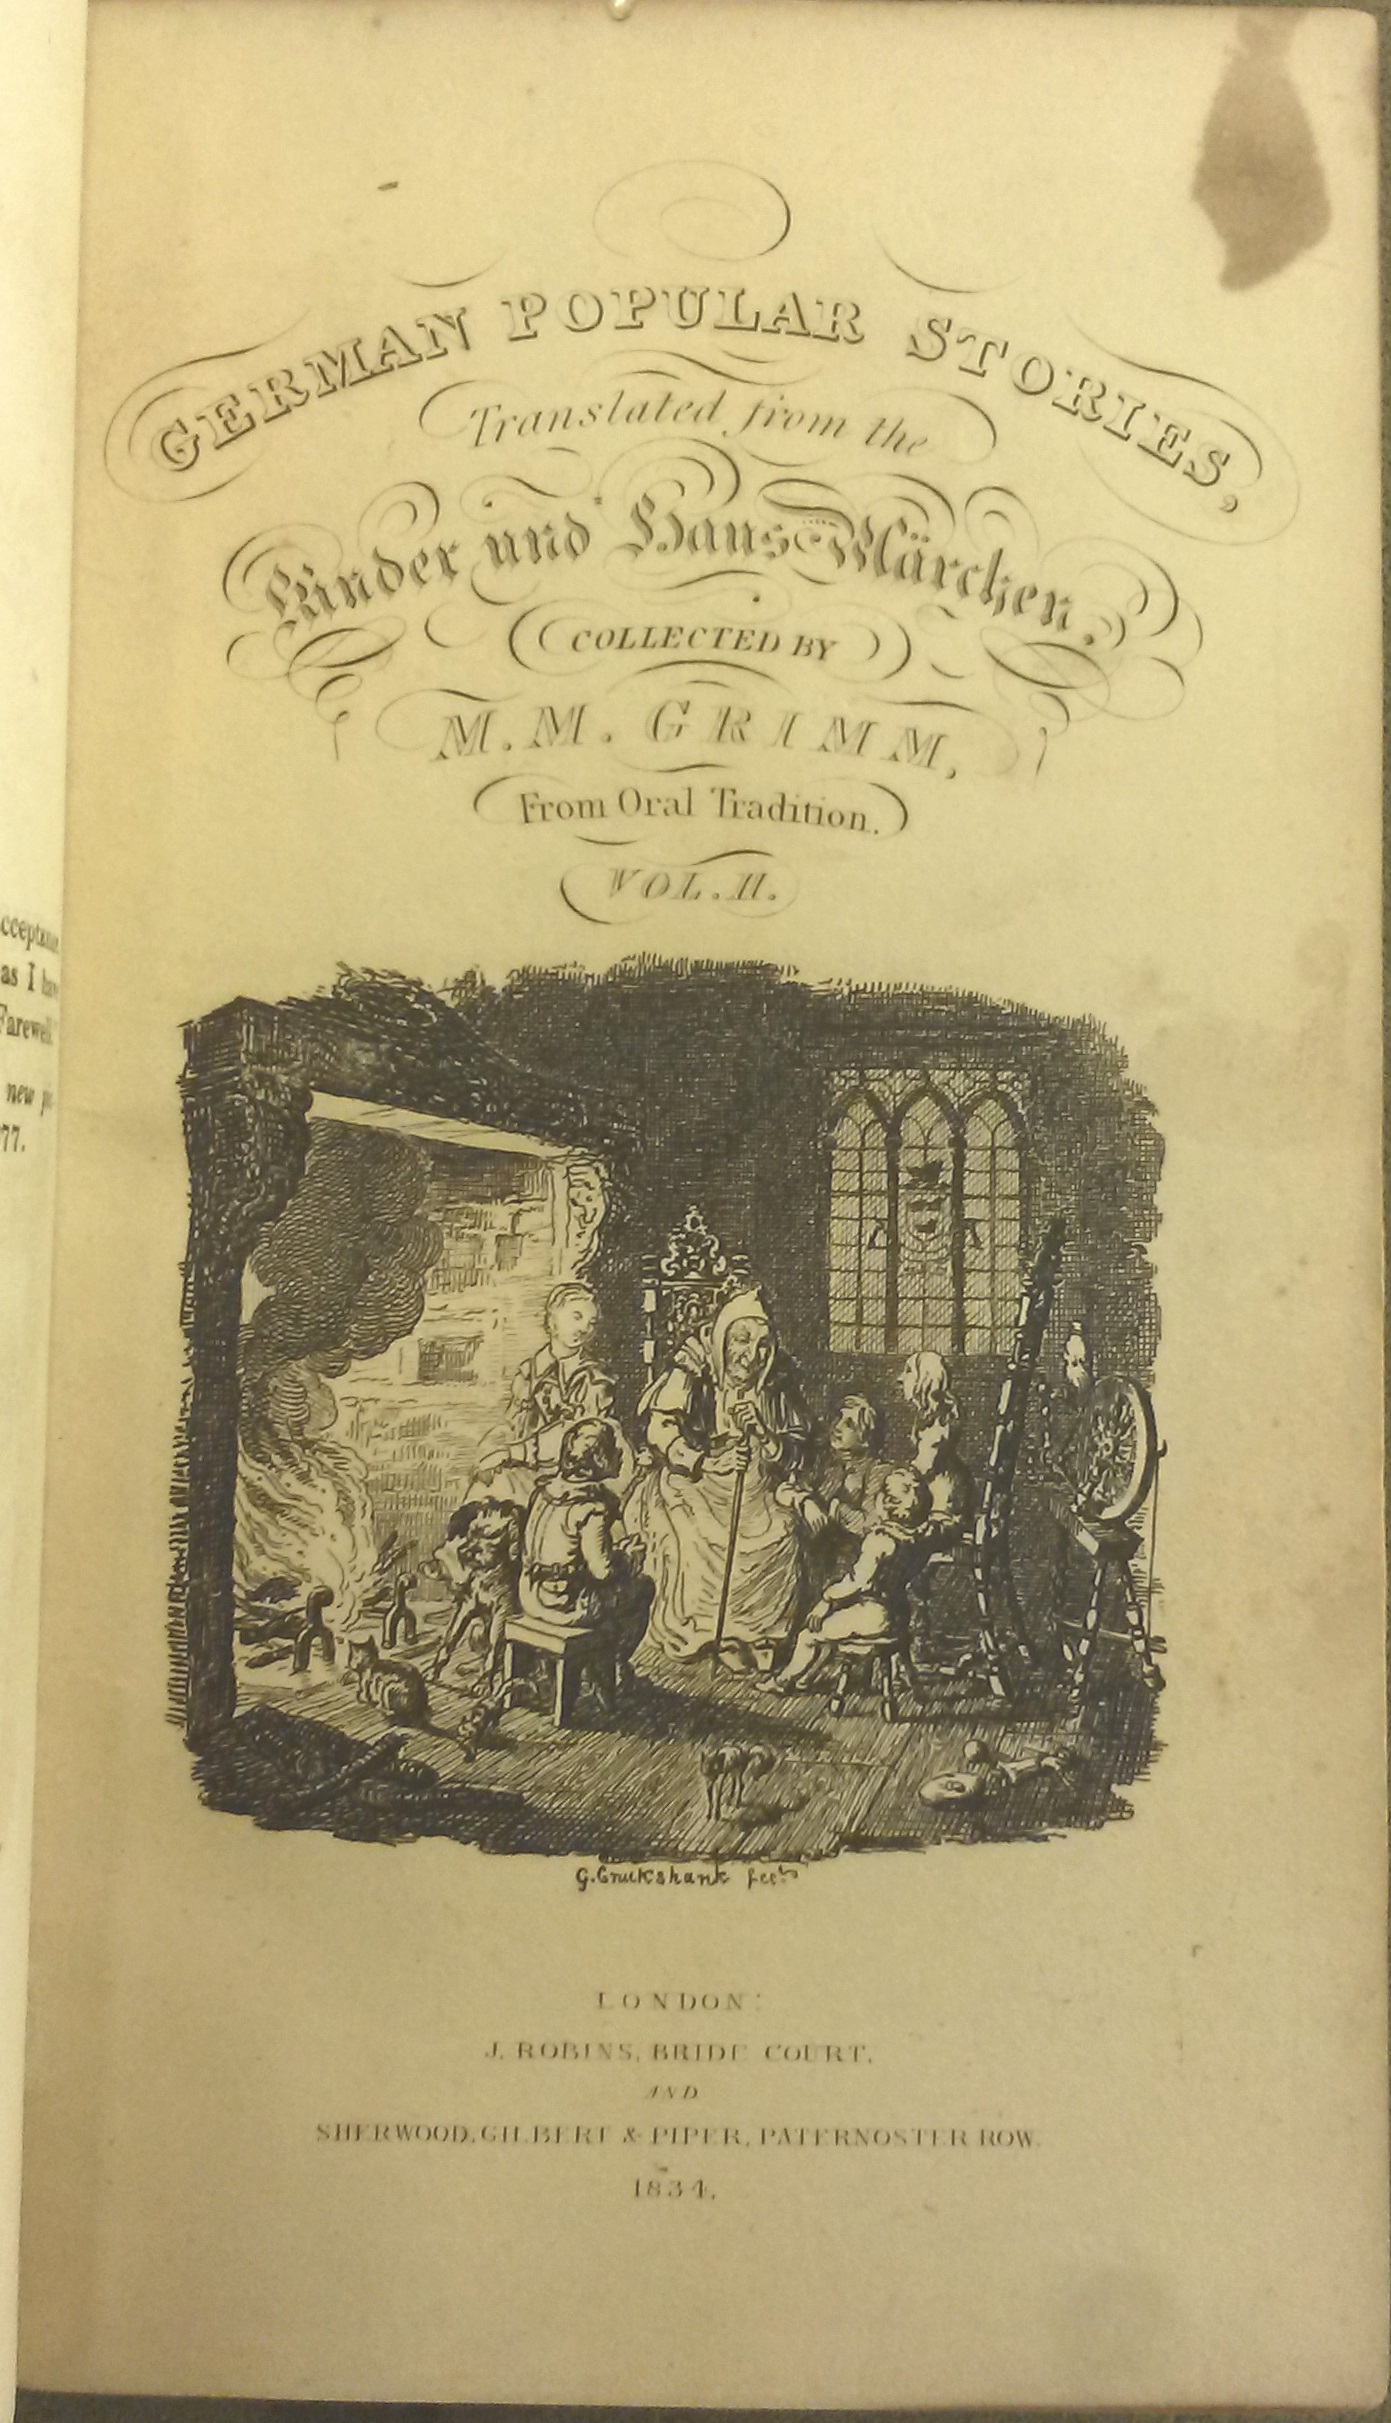 Title page of 1834 edition of German Popular Tales